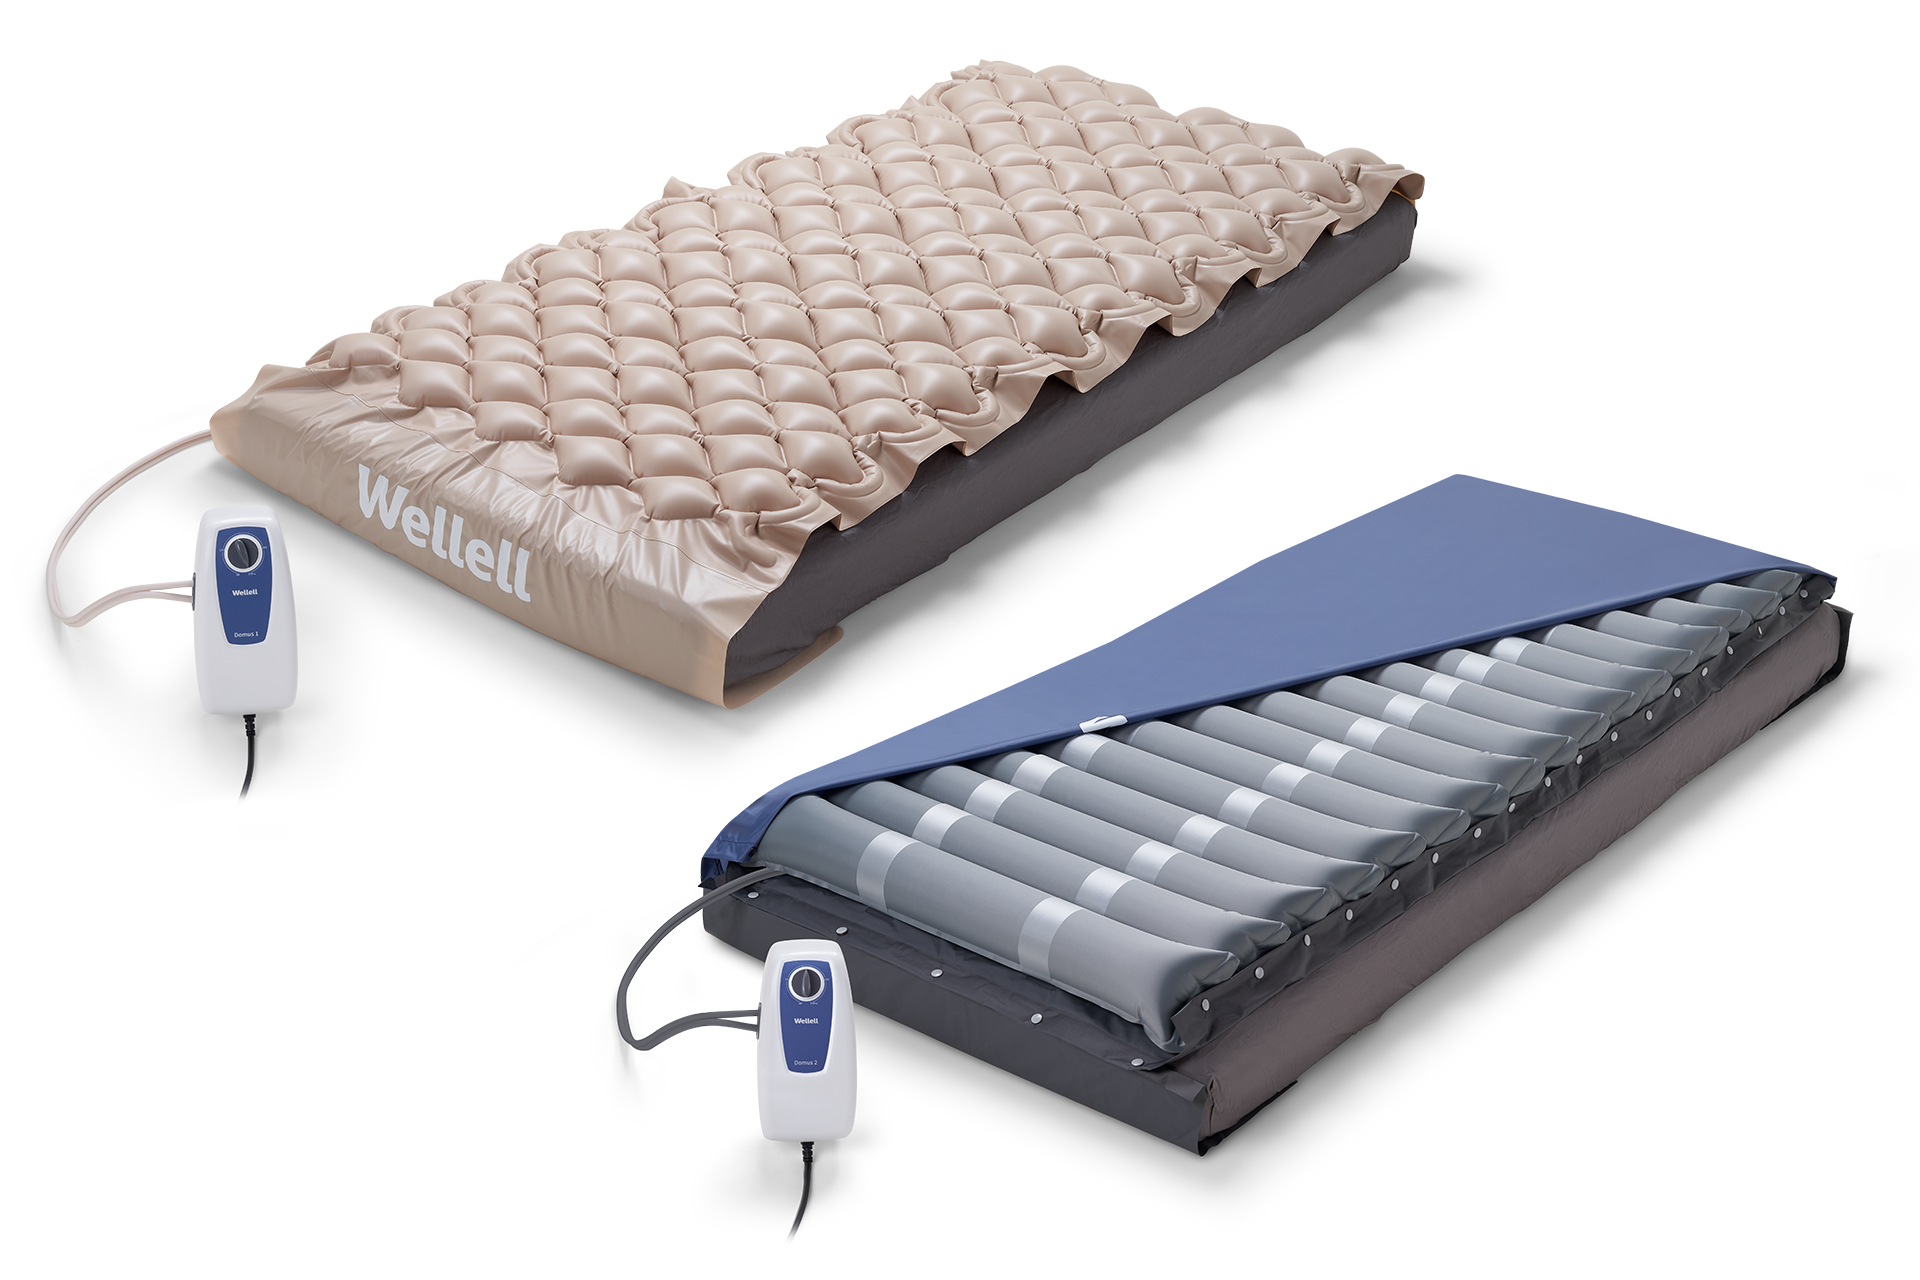 Domus 1 & 2 - medical bed -Wellell